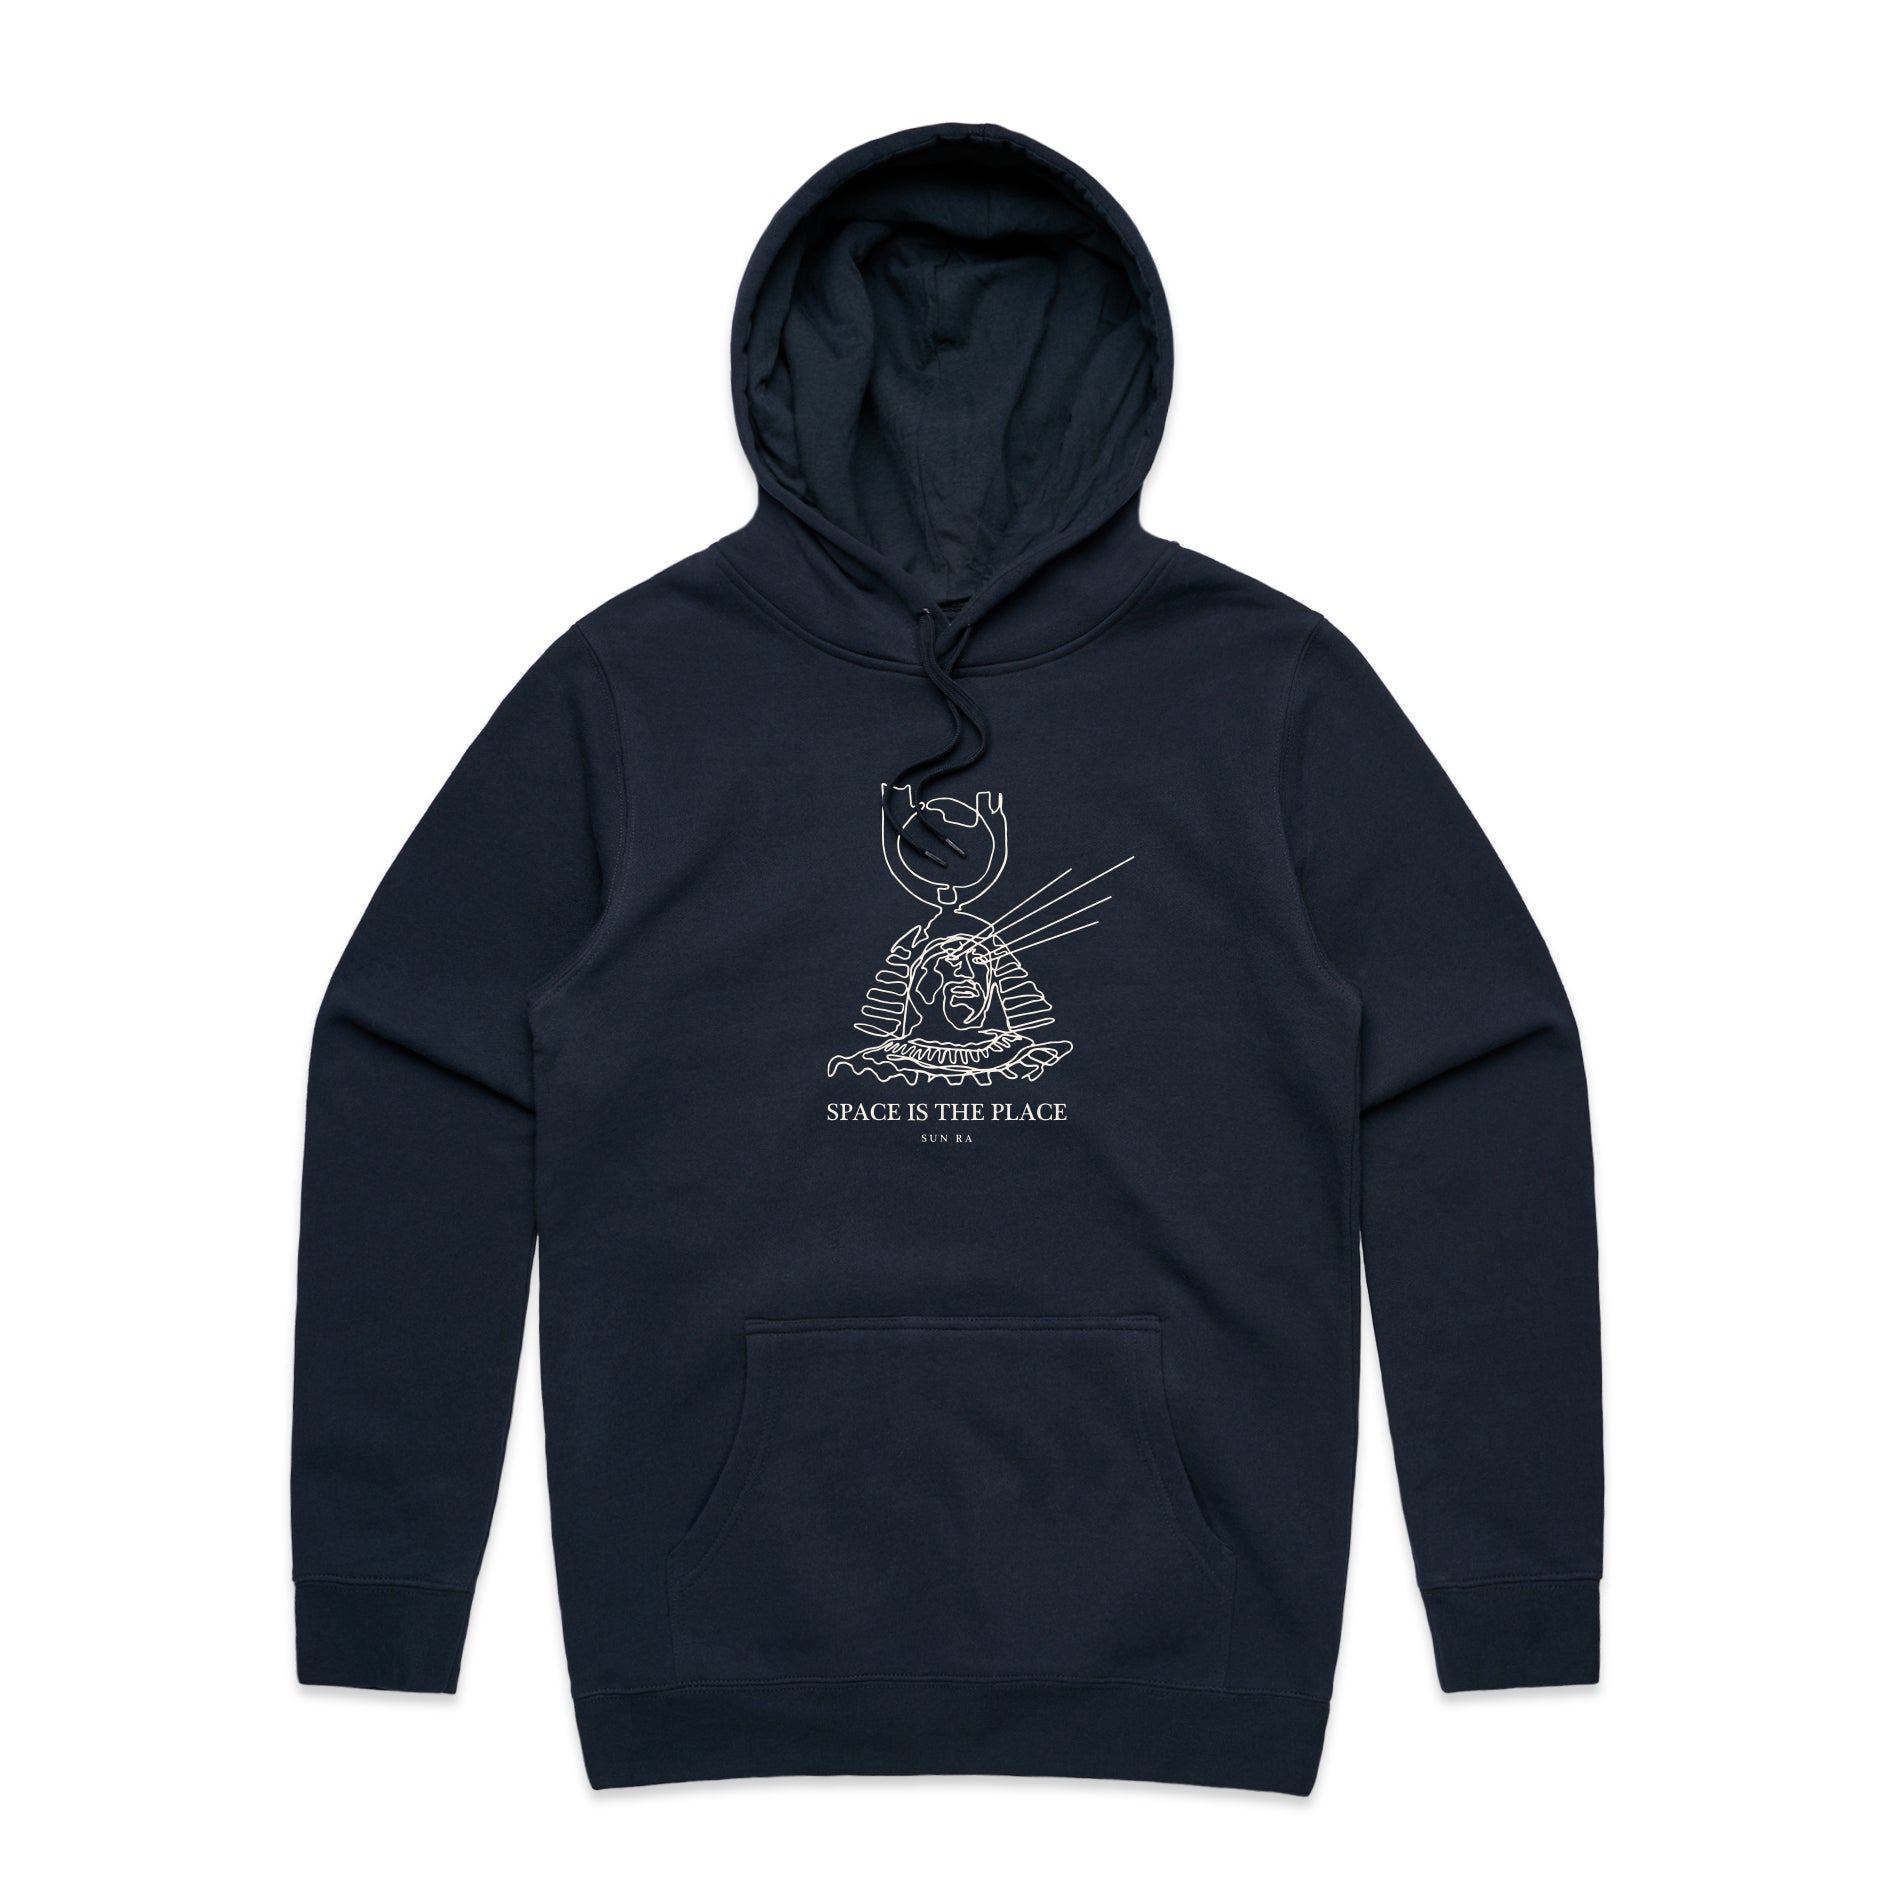 Sun Ra - Space In The Place Hoodie (Navy)